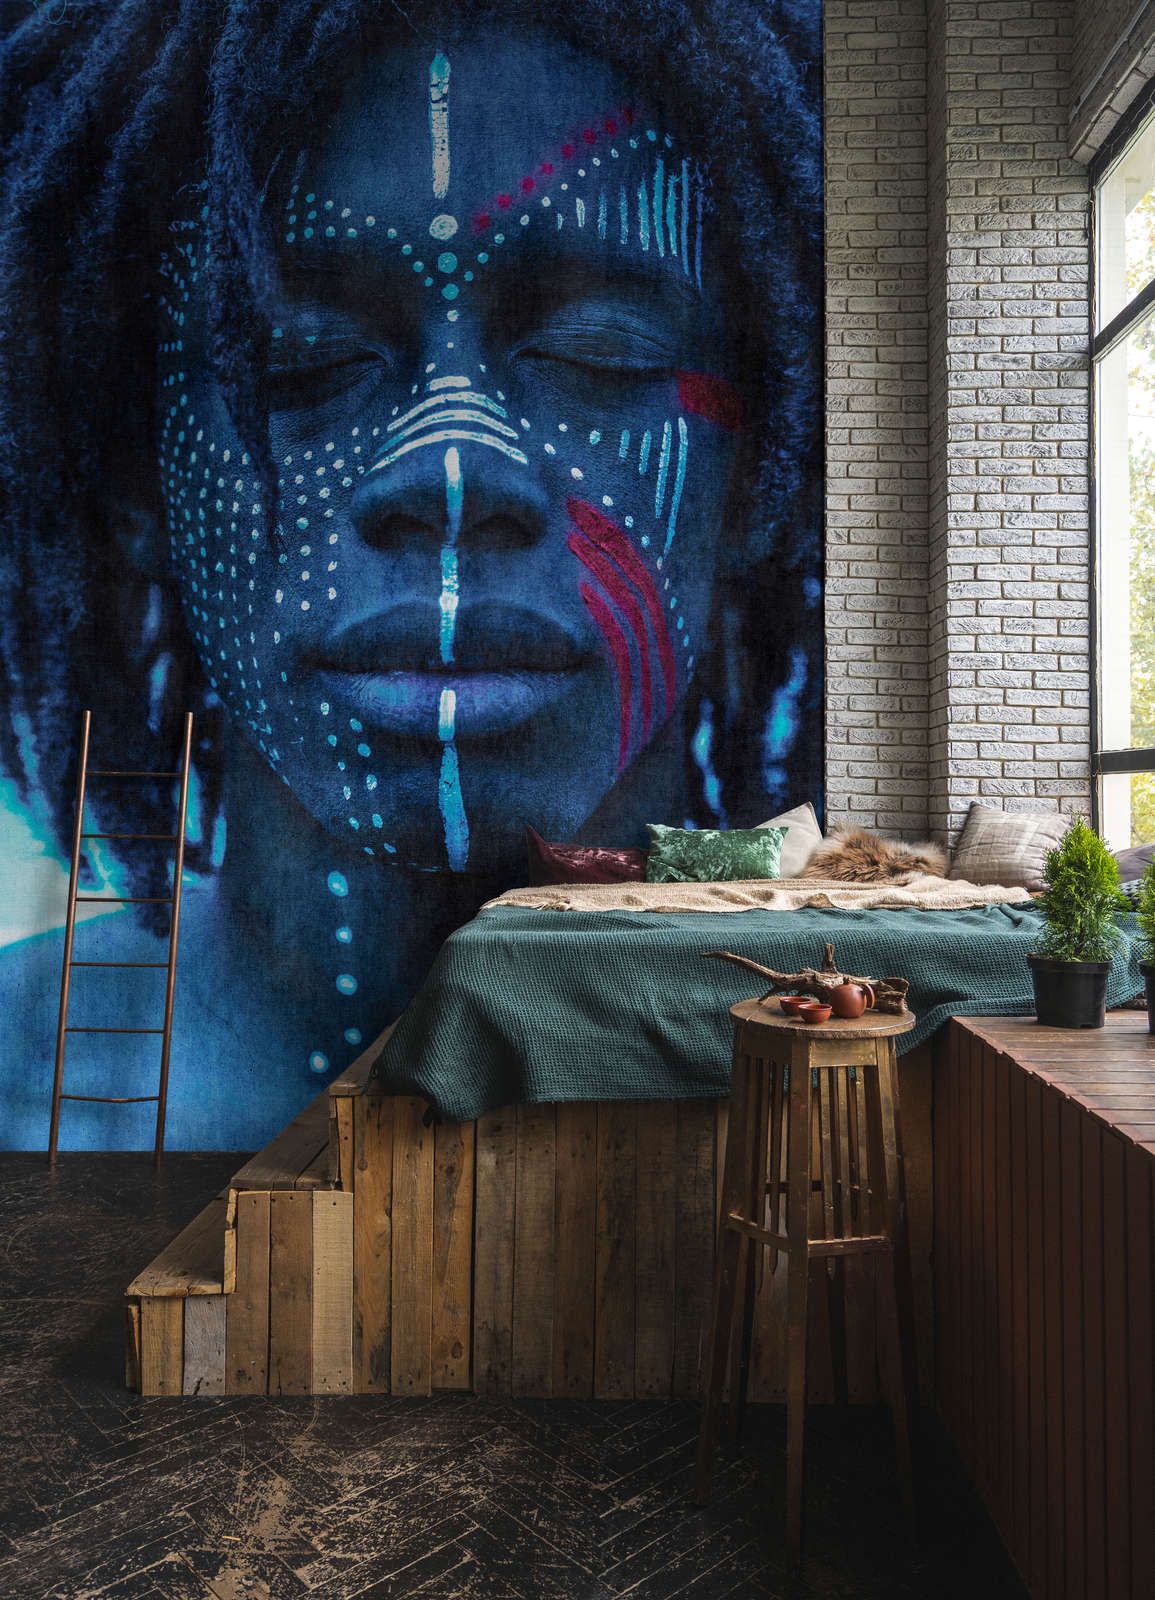             Photo wallpaper »mikala« - African portrait blue with tapestry structure - matt, smooth non-woven fabric
        